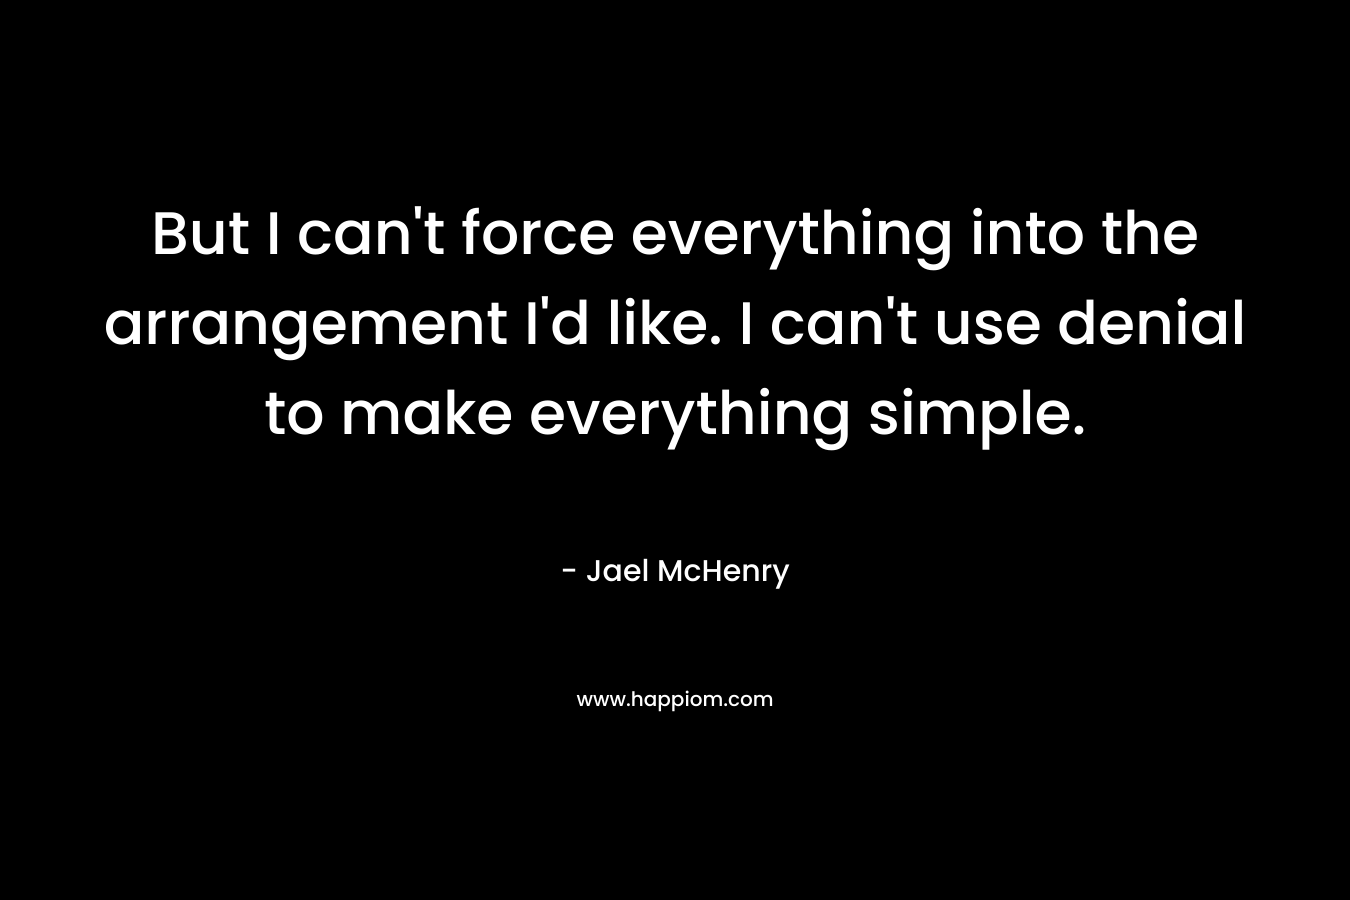 But I can’t force everything into the arrangement I’d like. I can’t use denial to make everything simple. – Jael McHenry